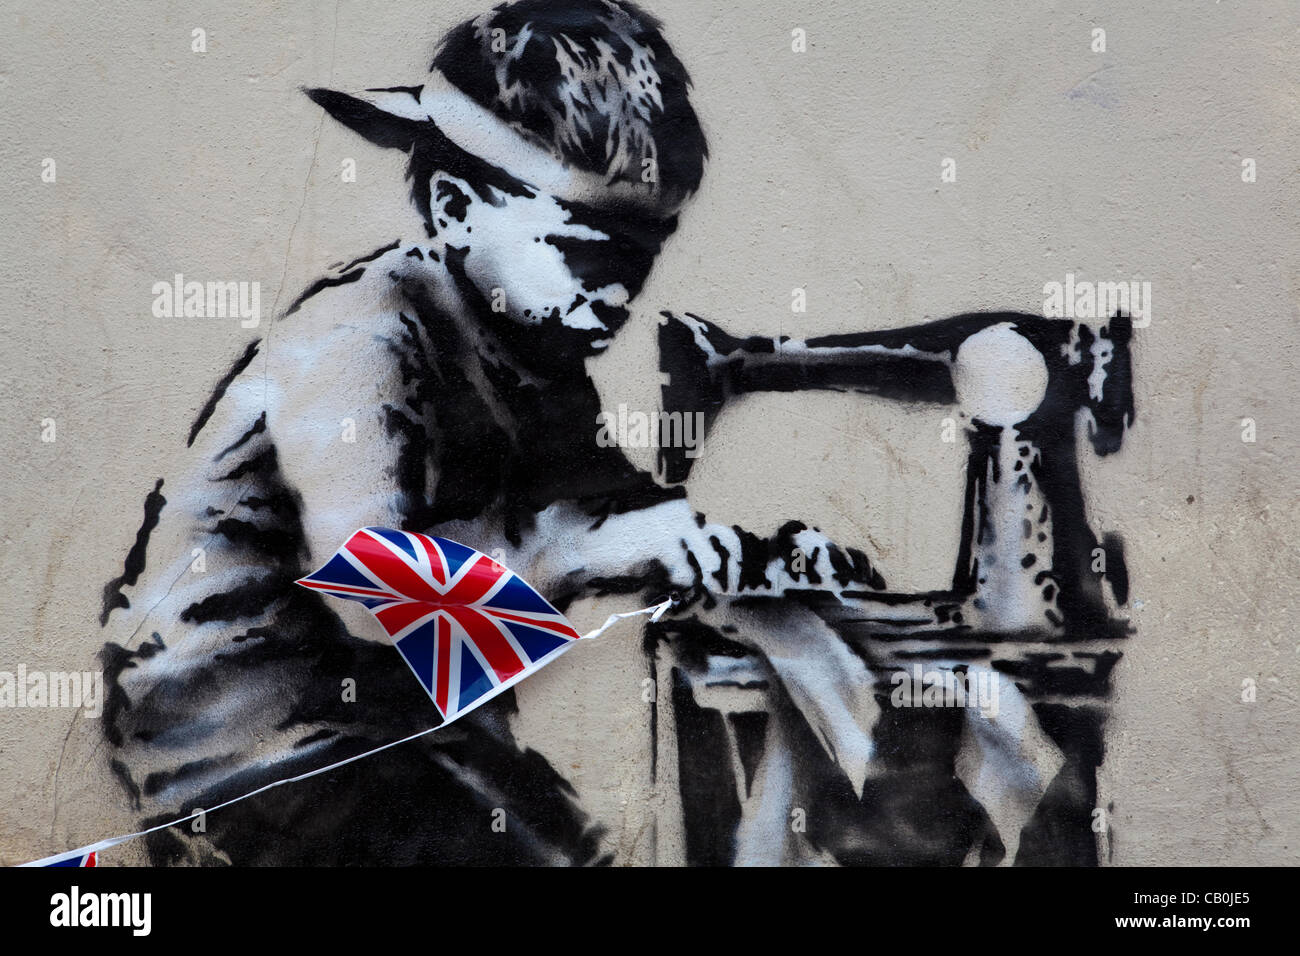 A new work from Graffiti Artist Banksy has appeared overnight in London. The piece depicts a Asian child stitching together Union Jack Bunting.  The work on the wall of retailer 'Poundland' is said to be Banksy's commentary on child labour and the upcoming Queen's Diamond Jubilee celebrations. Stock Photo